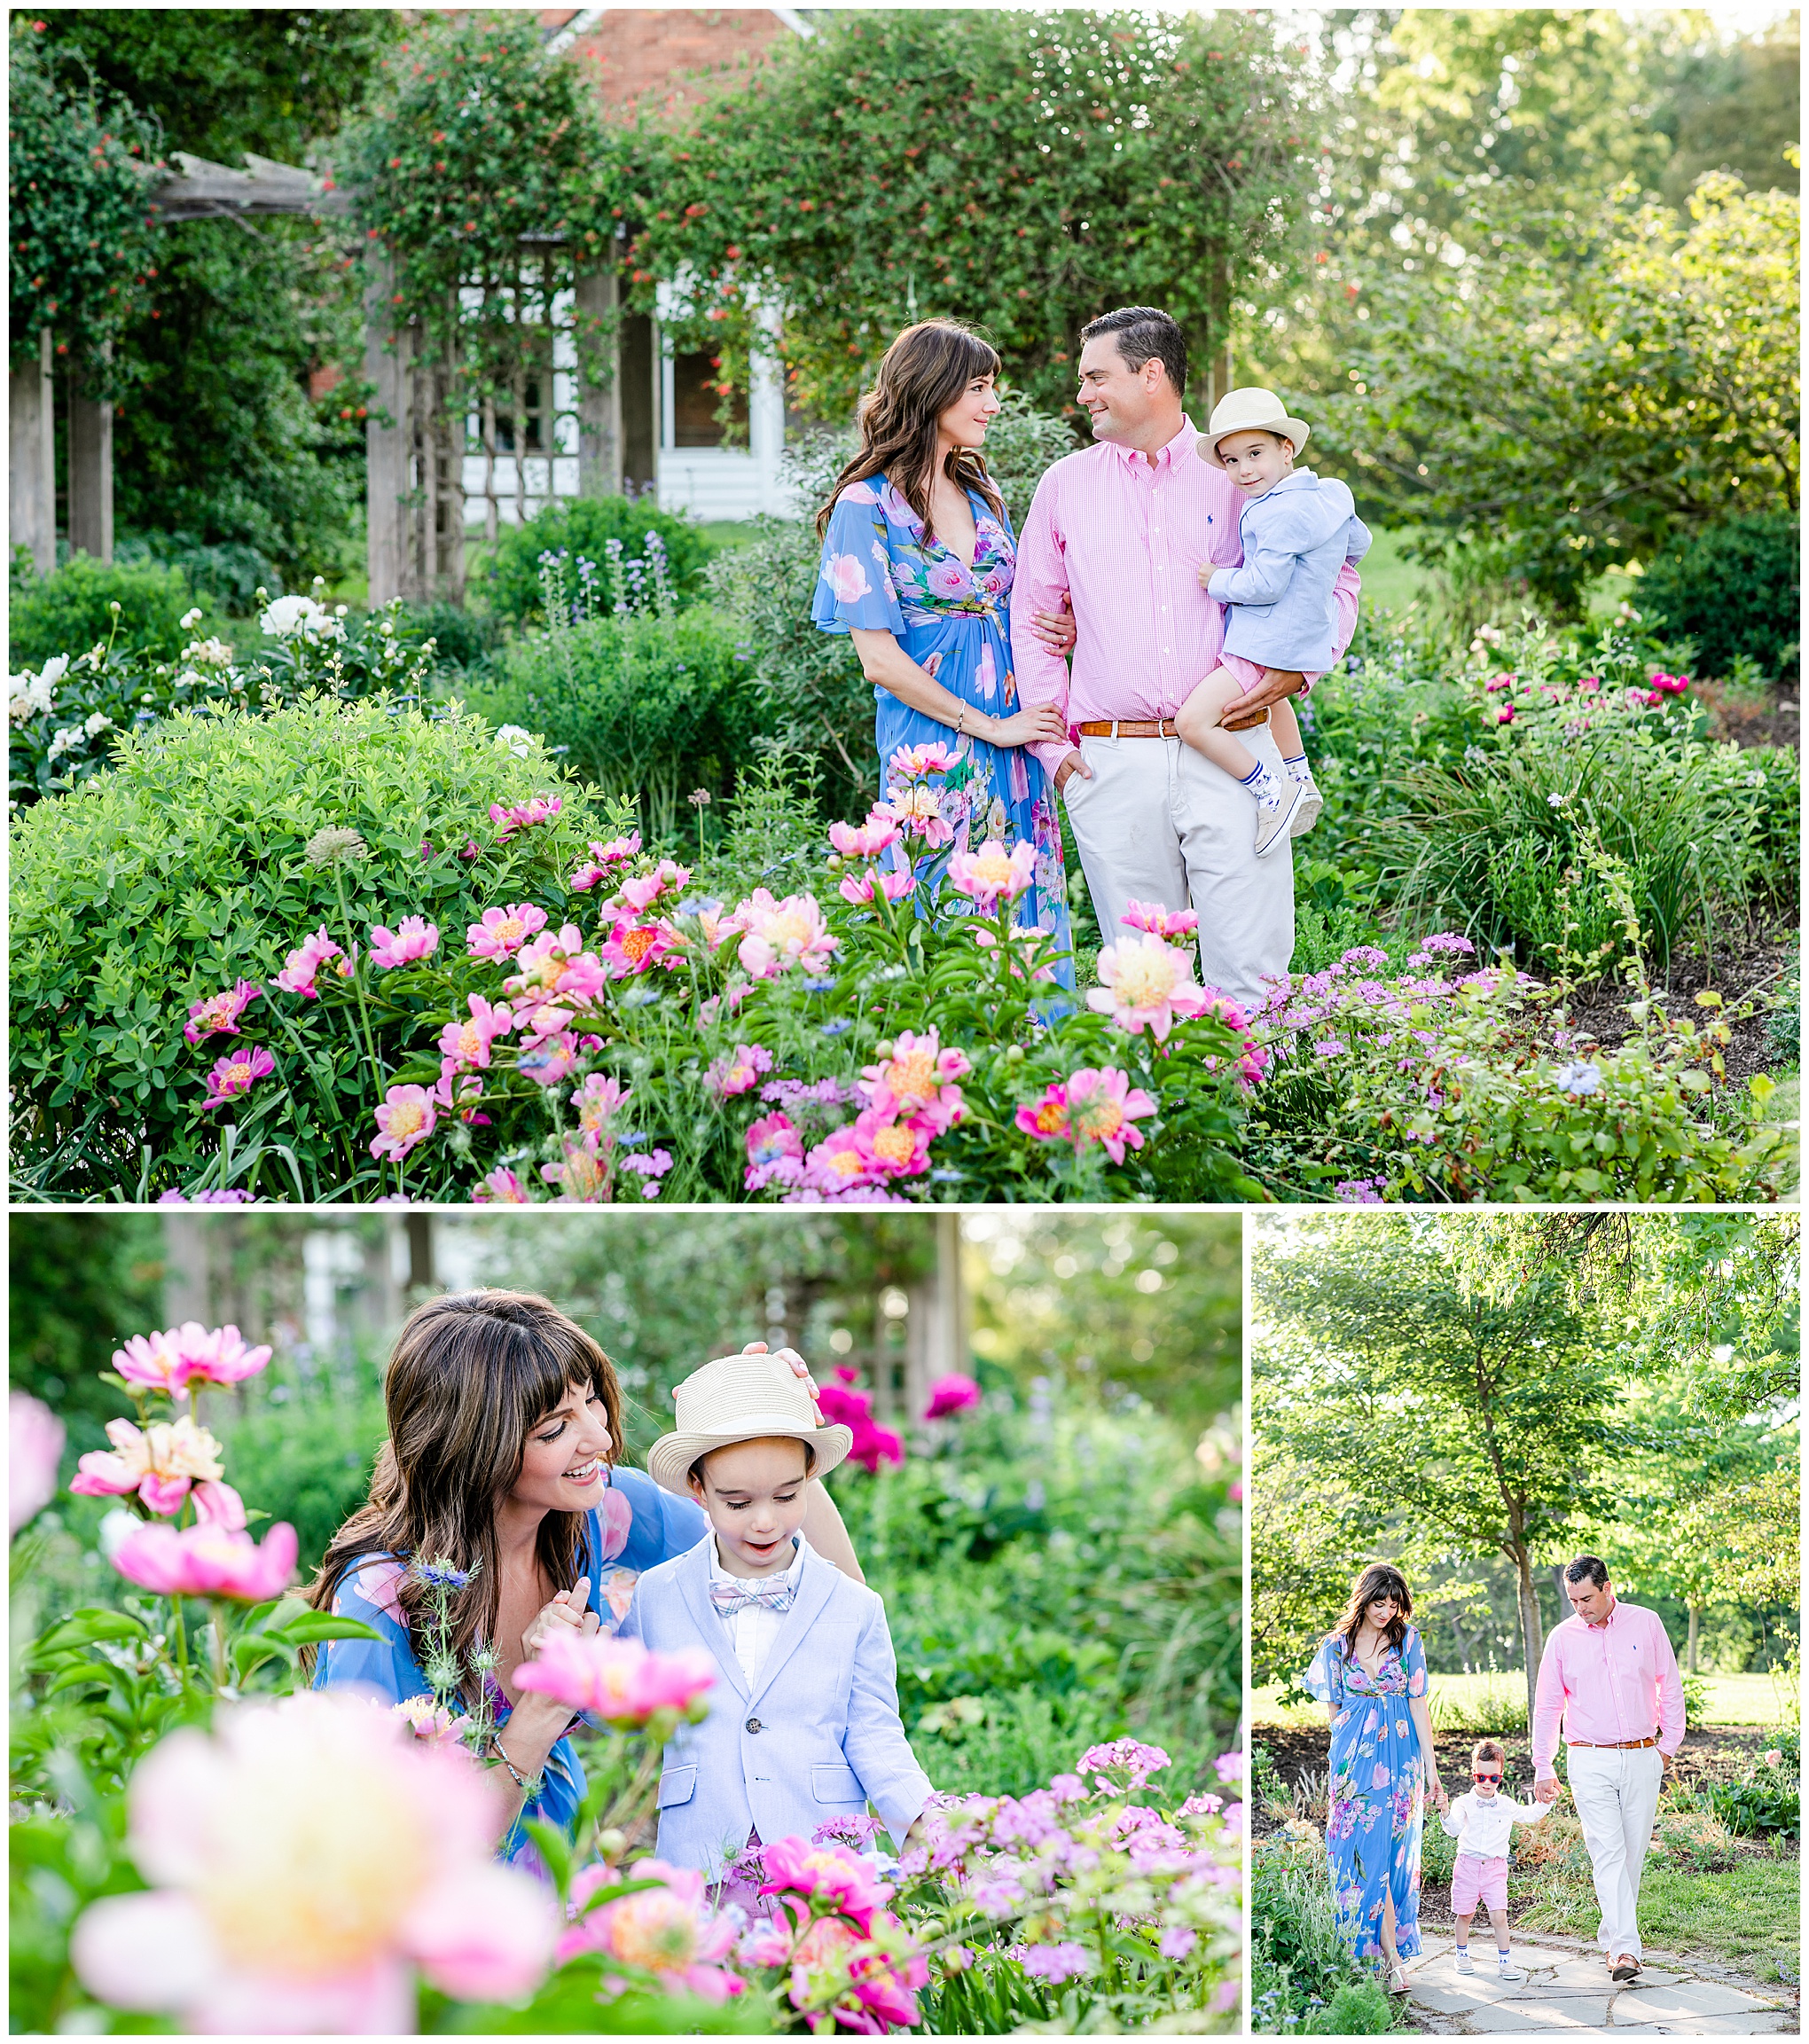 Green Spring Gardens Family Photos, Green Spring Gardens photos, Green Spring Gardens Alexandria, Alexandria family photos, spring family photos, Alexandria photographer, Rachel E.H. Photography, family walking holding hands, woman playing with toddler, family in garden